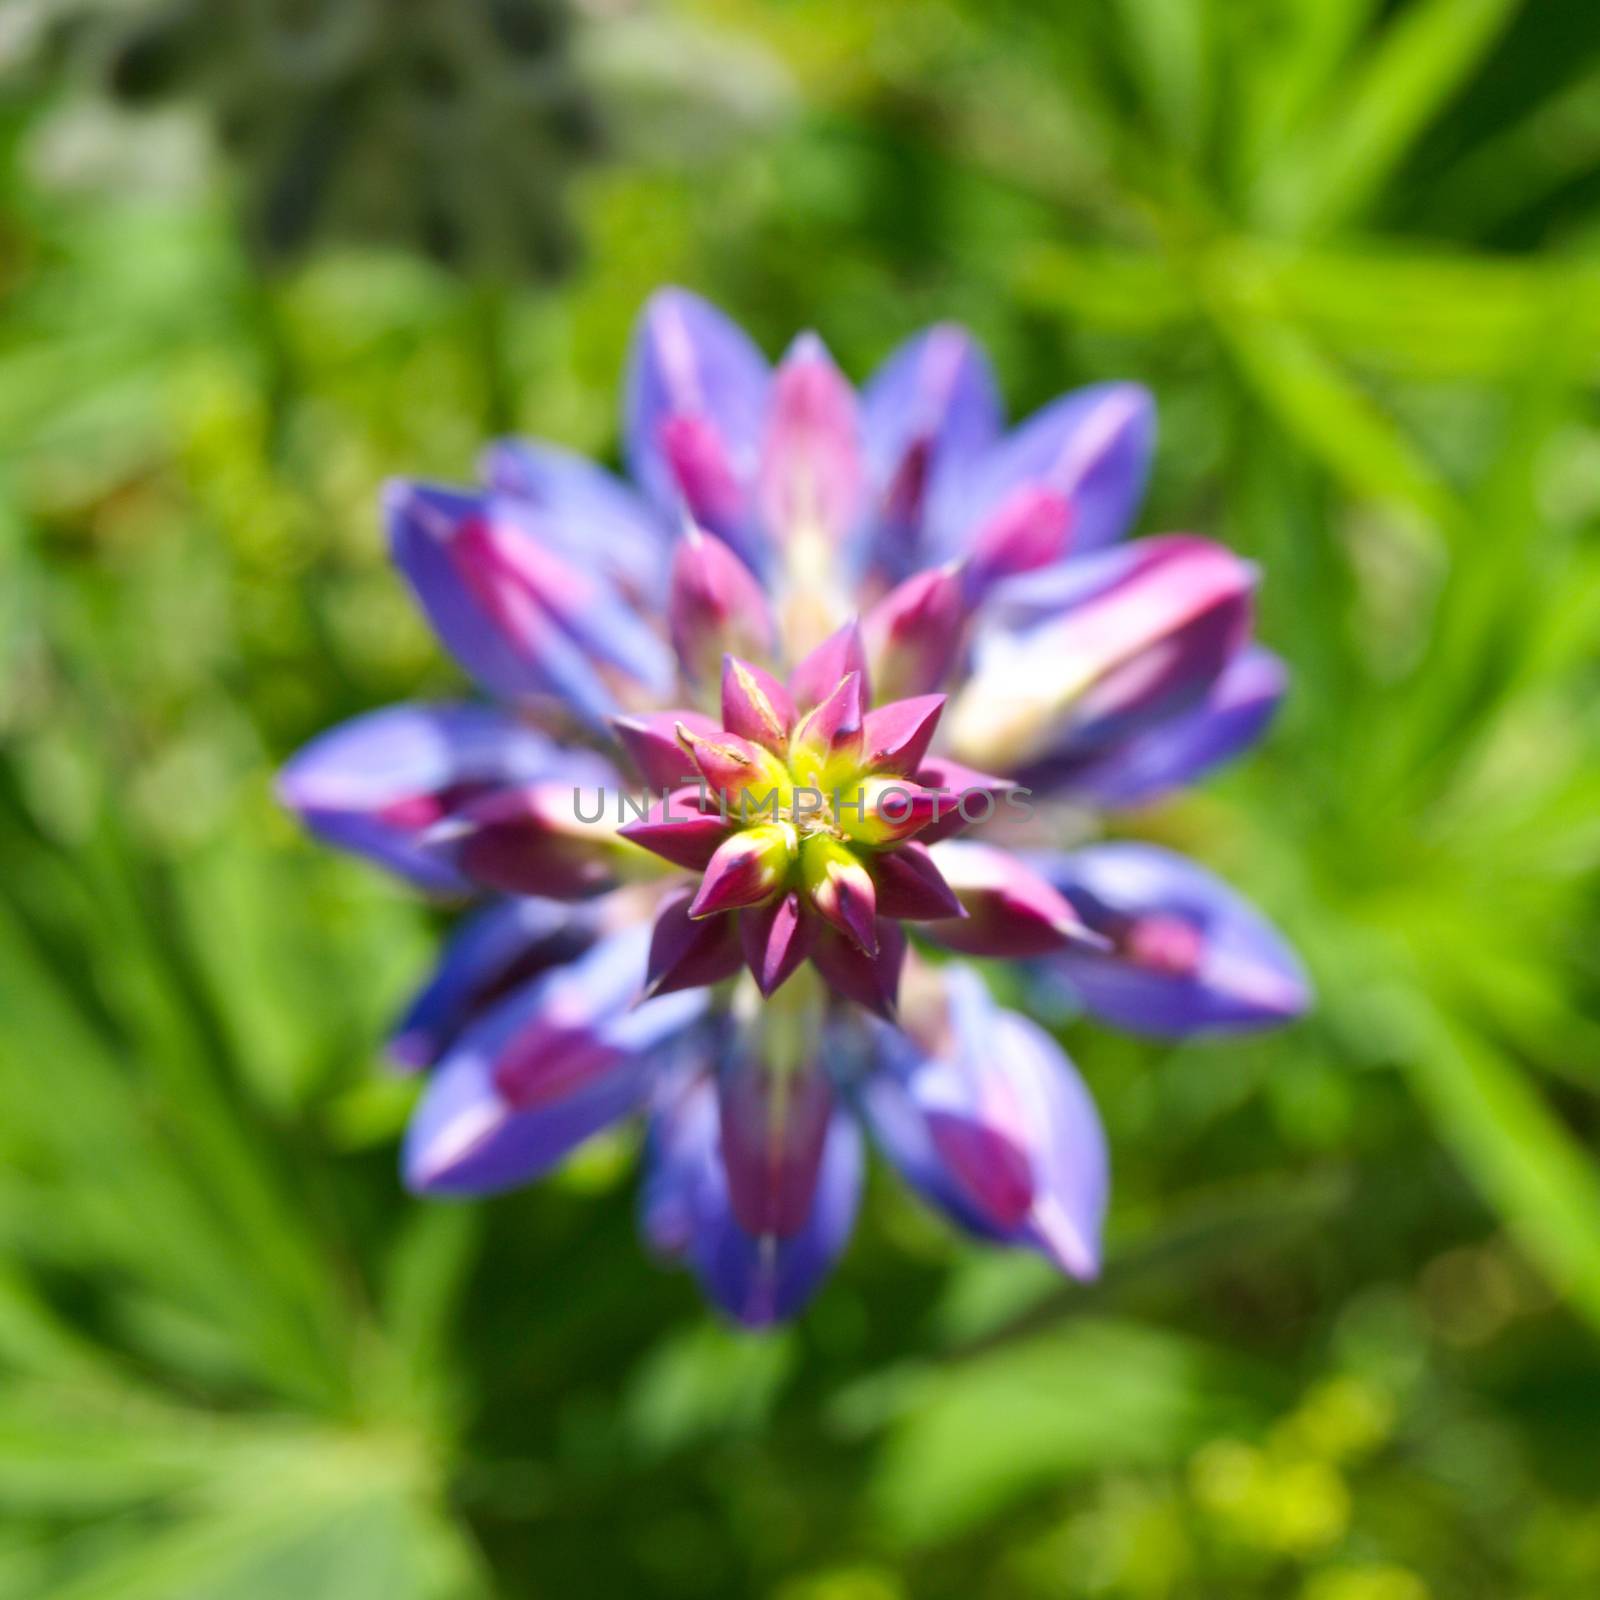 Violet lupine flower in a shape of star when seen from above with green grass bokeh background. Shallow depth of field.